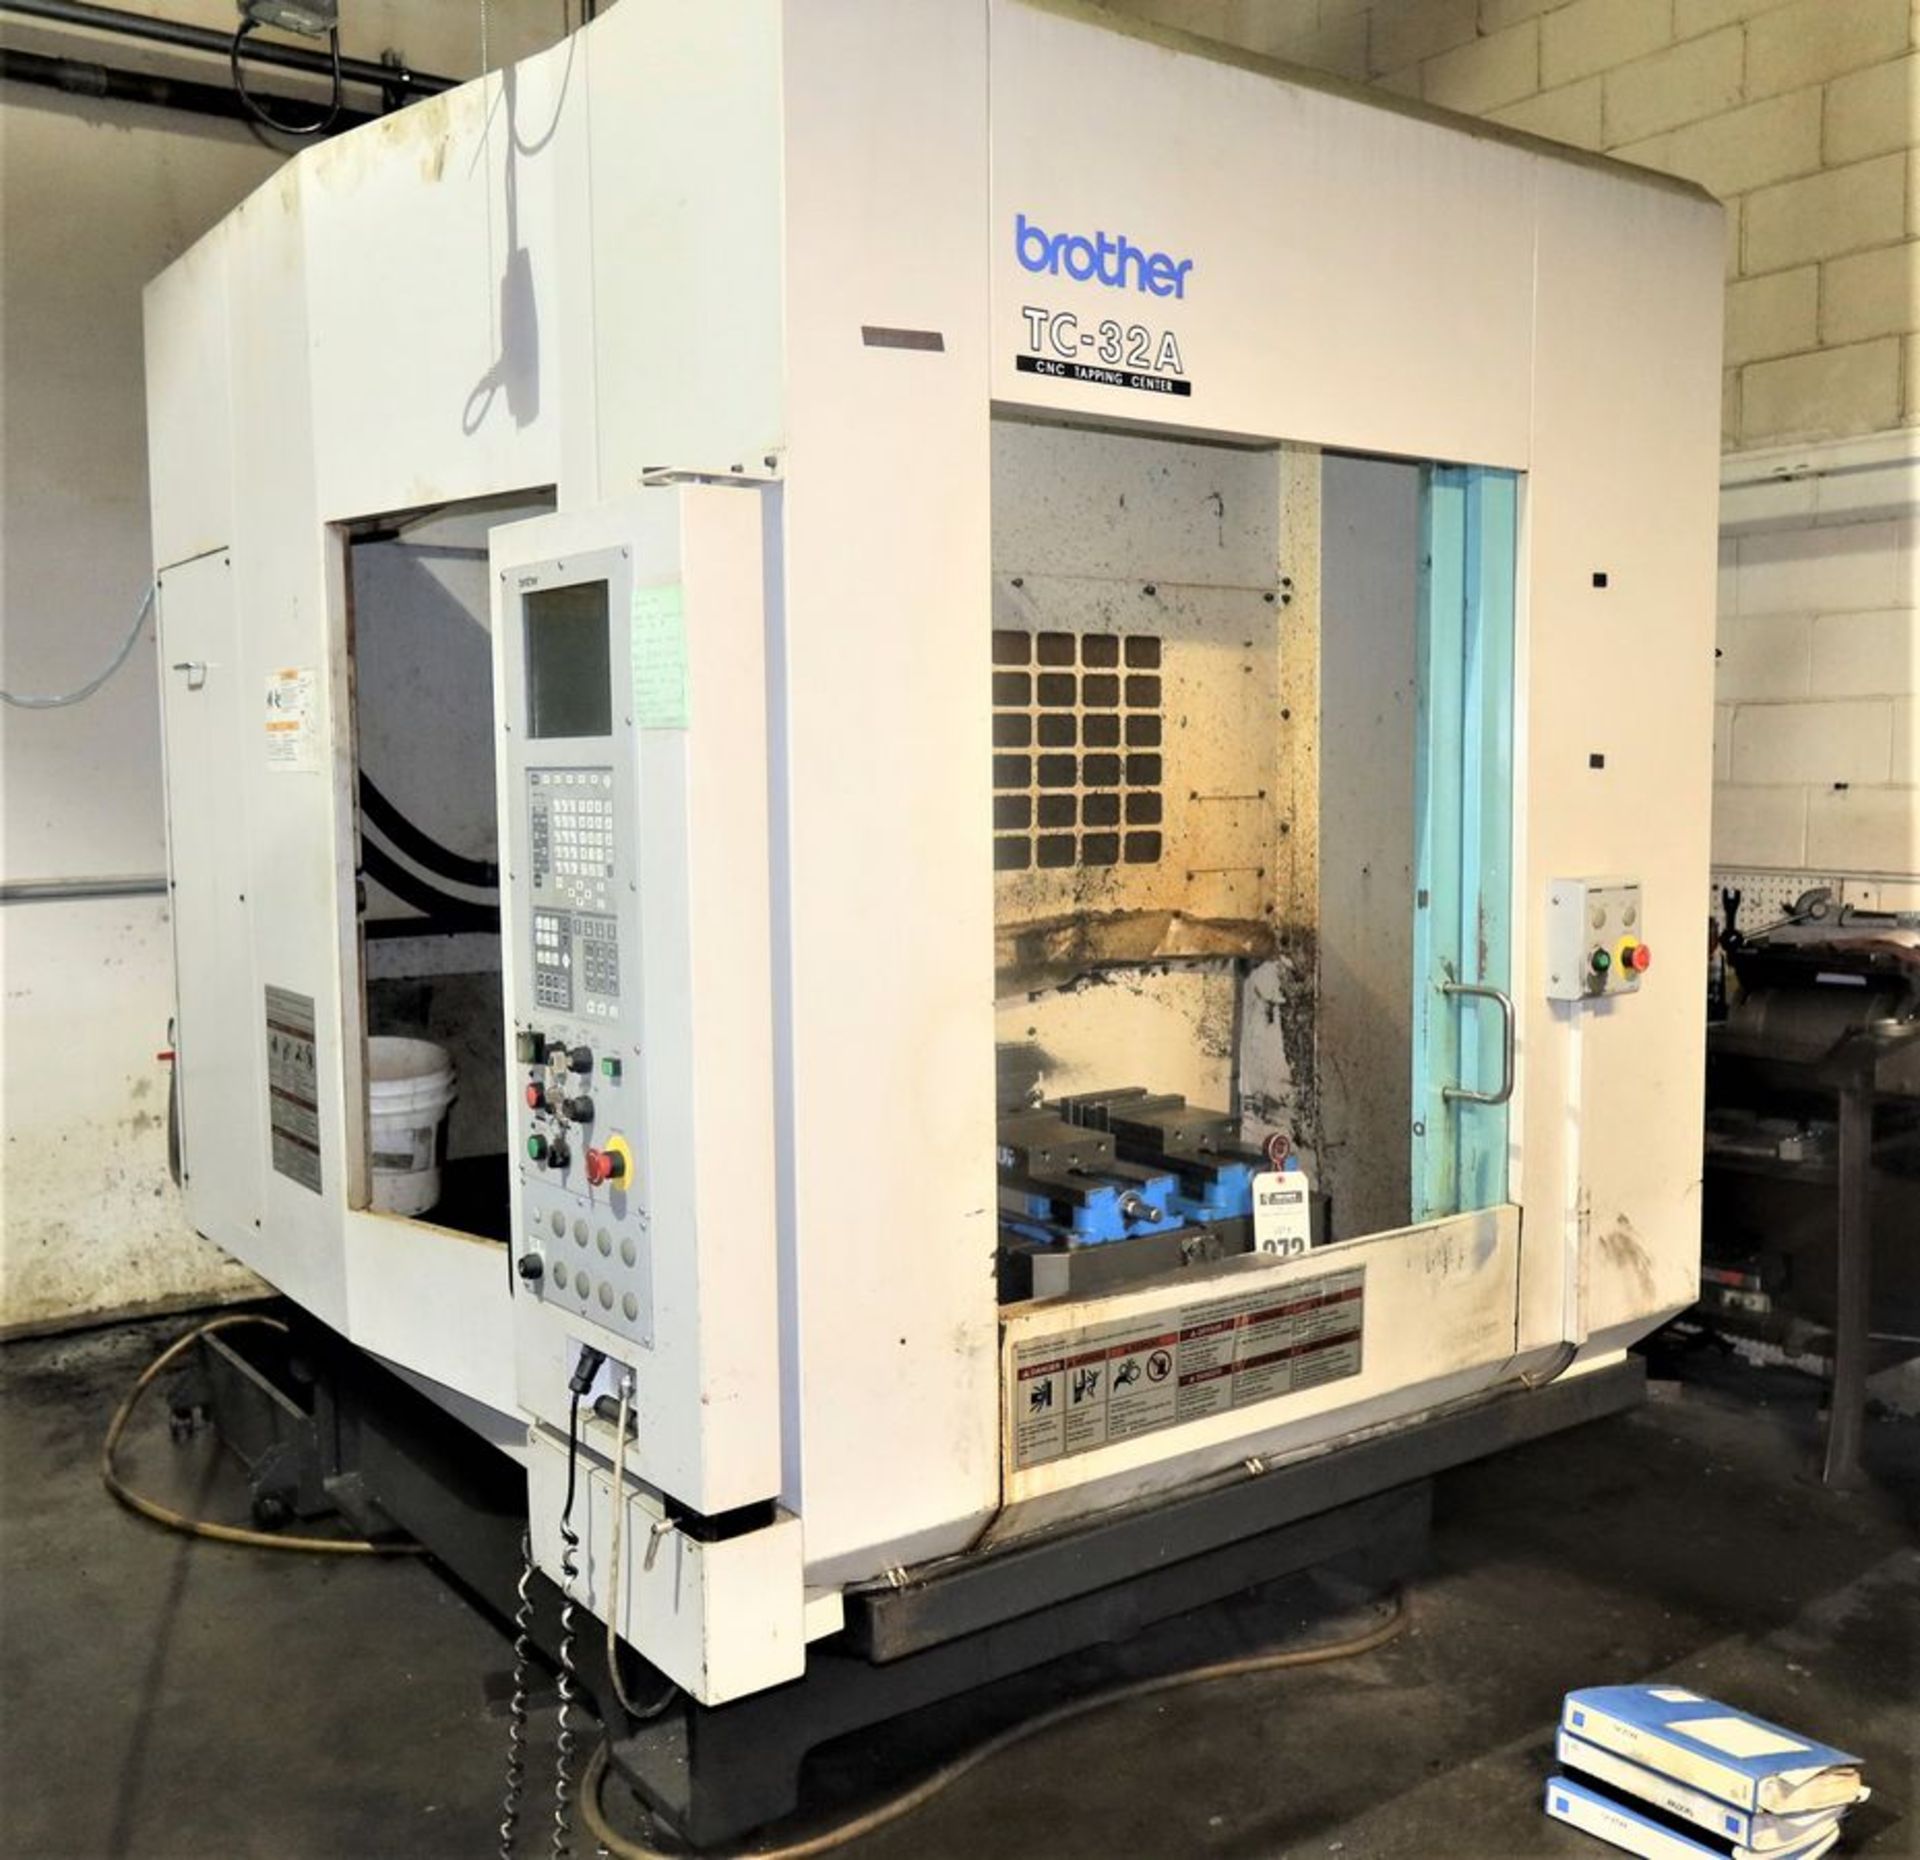 BROTHER TC-32A CNC DRILL/TAP CENTER, S/N 111481, NEW 2001